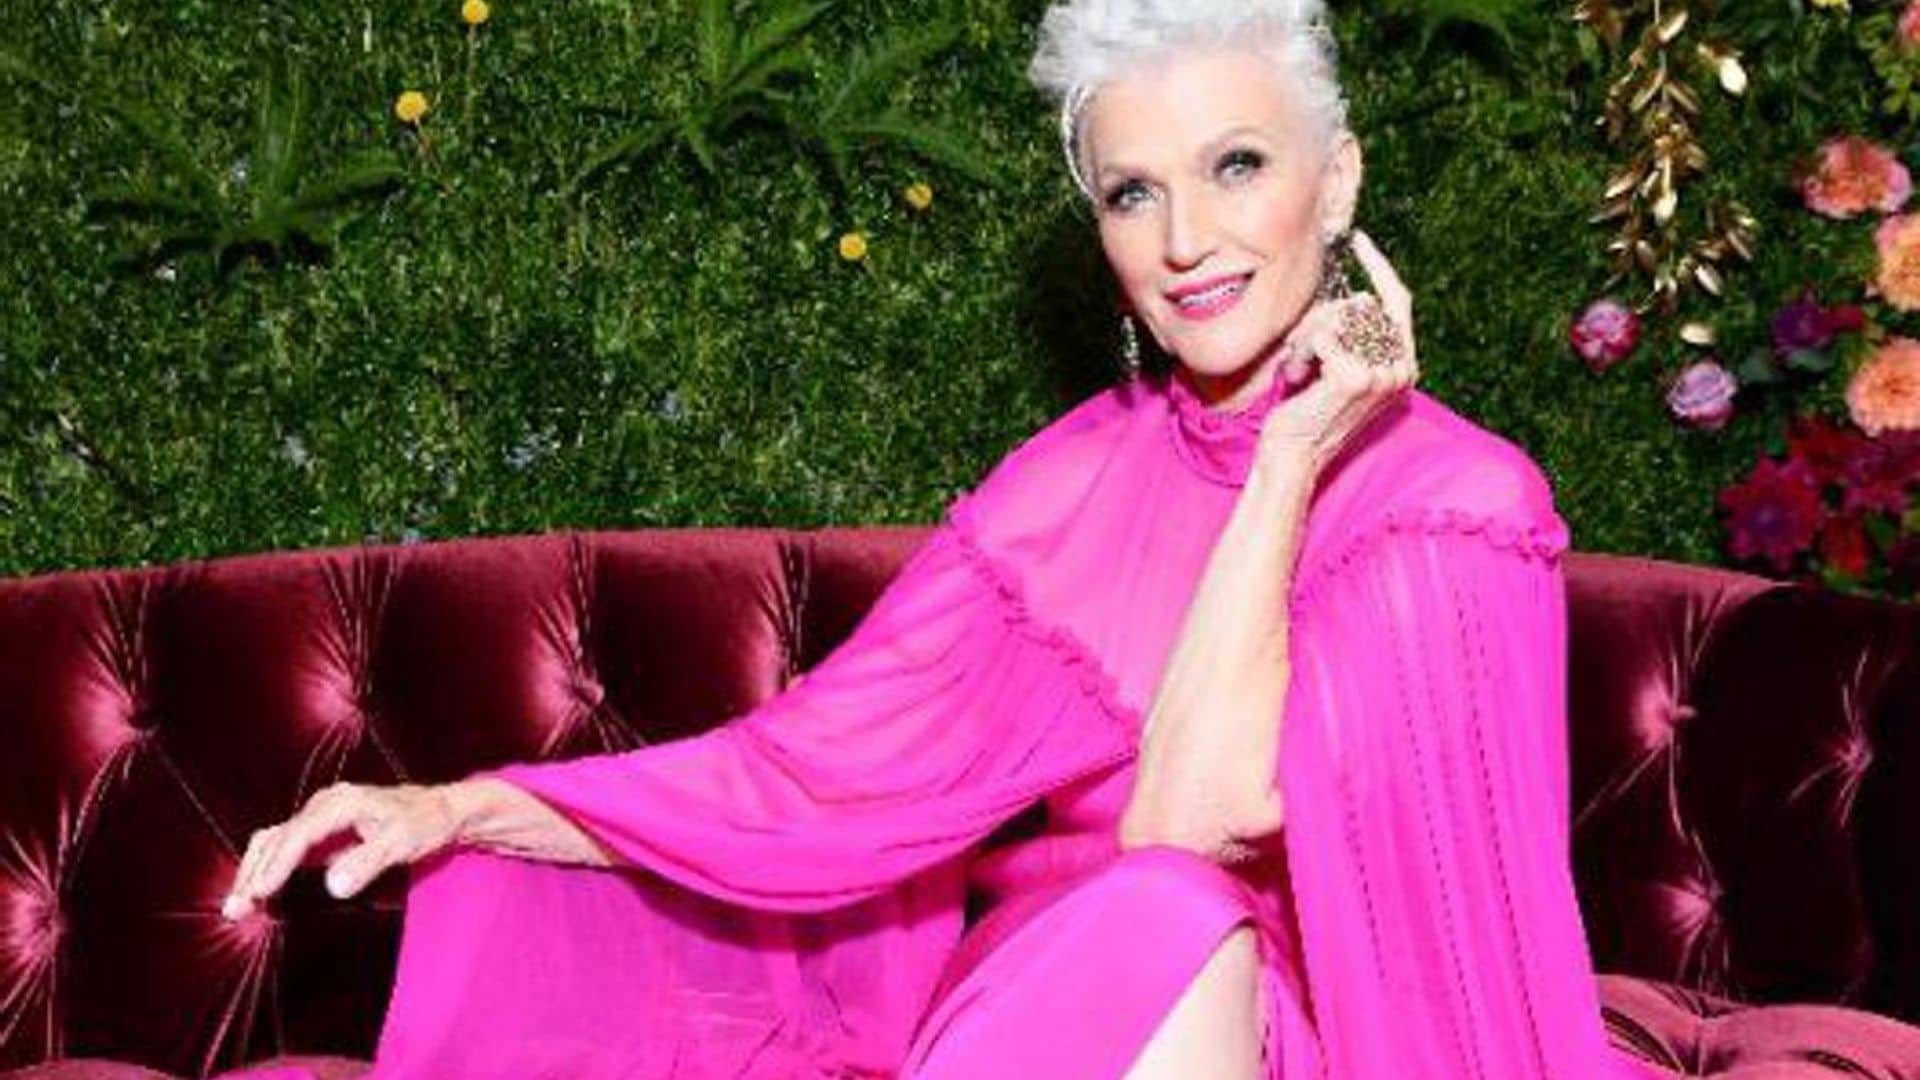 Maye Musk, Elon Musk’s 74-year-old mom, stunned on the cover of Sports Illustrated Swimsuit